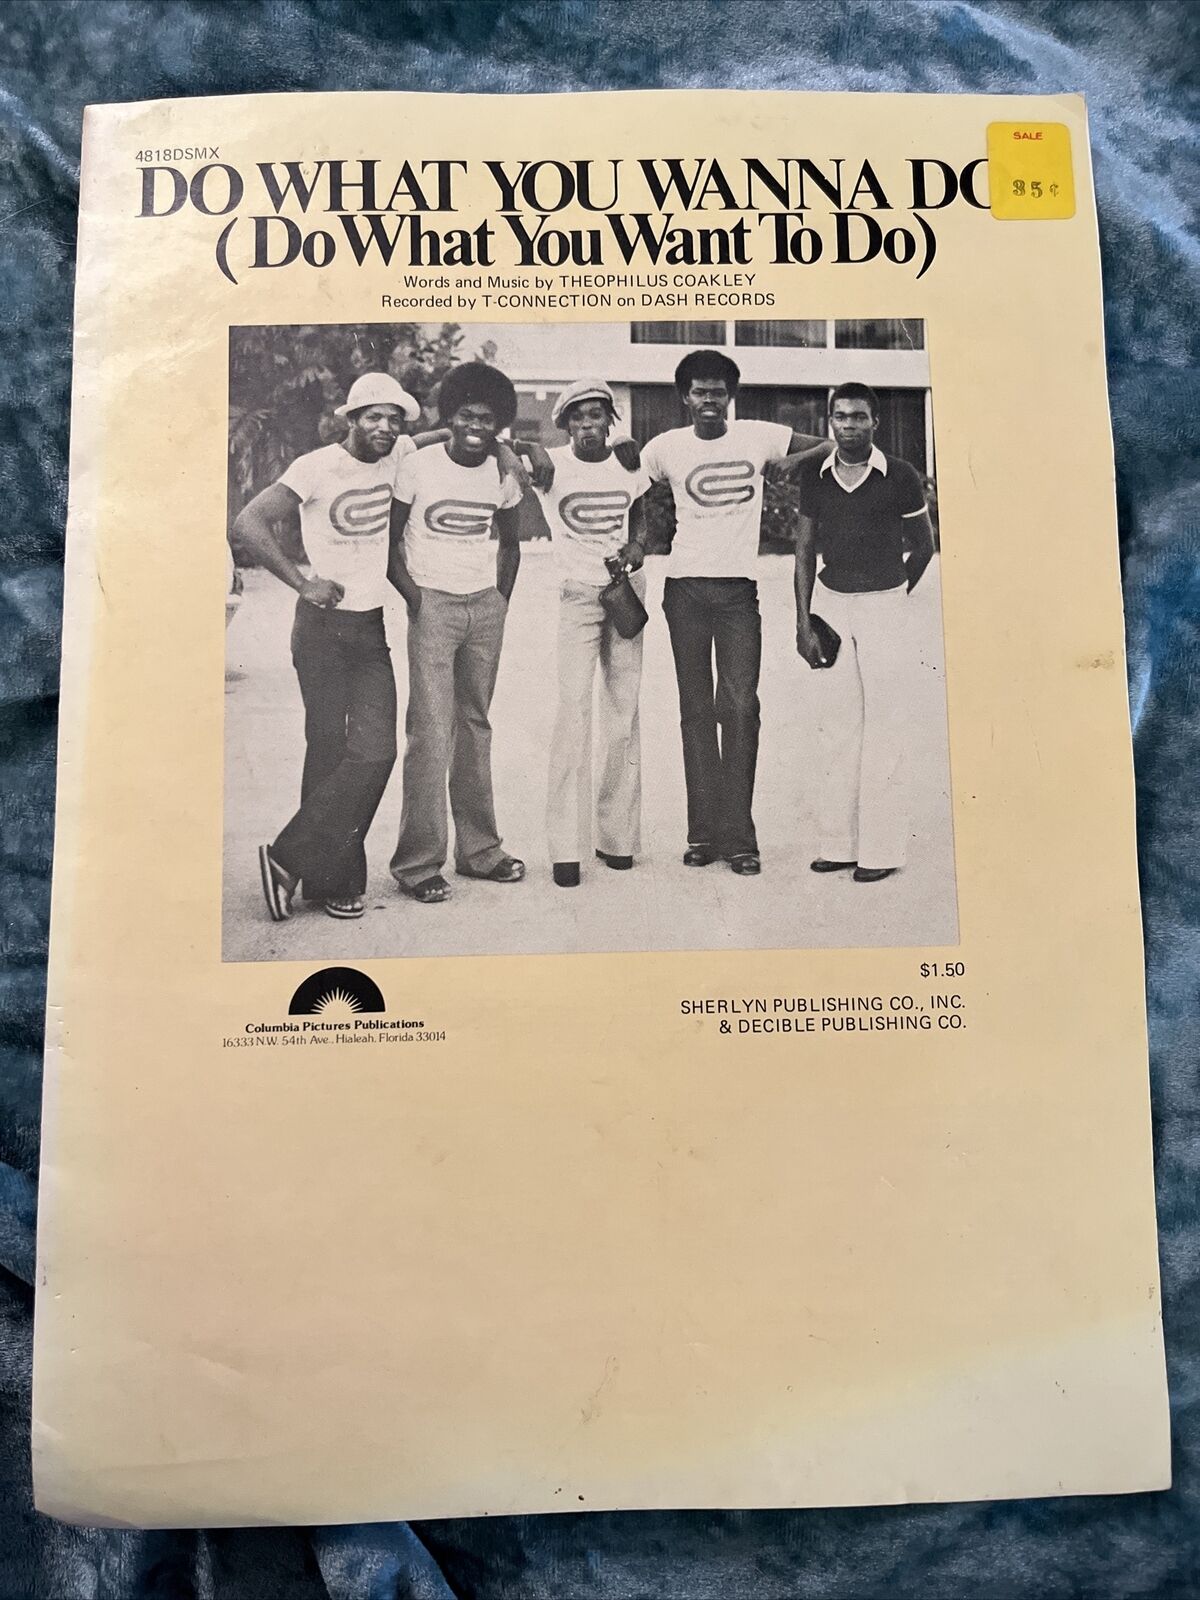 1977 DO WHAT YOU WANNA DO T-CONNECTION DASH RECORDS SHEET MUSIC RARE VTG